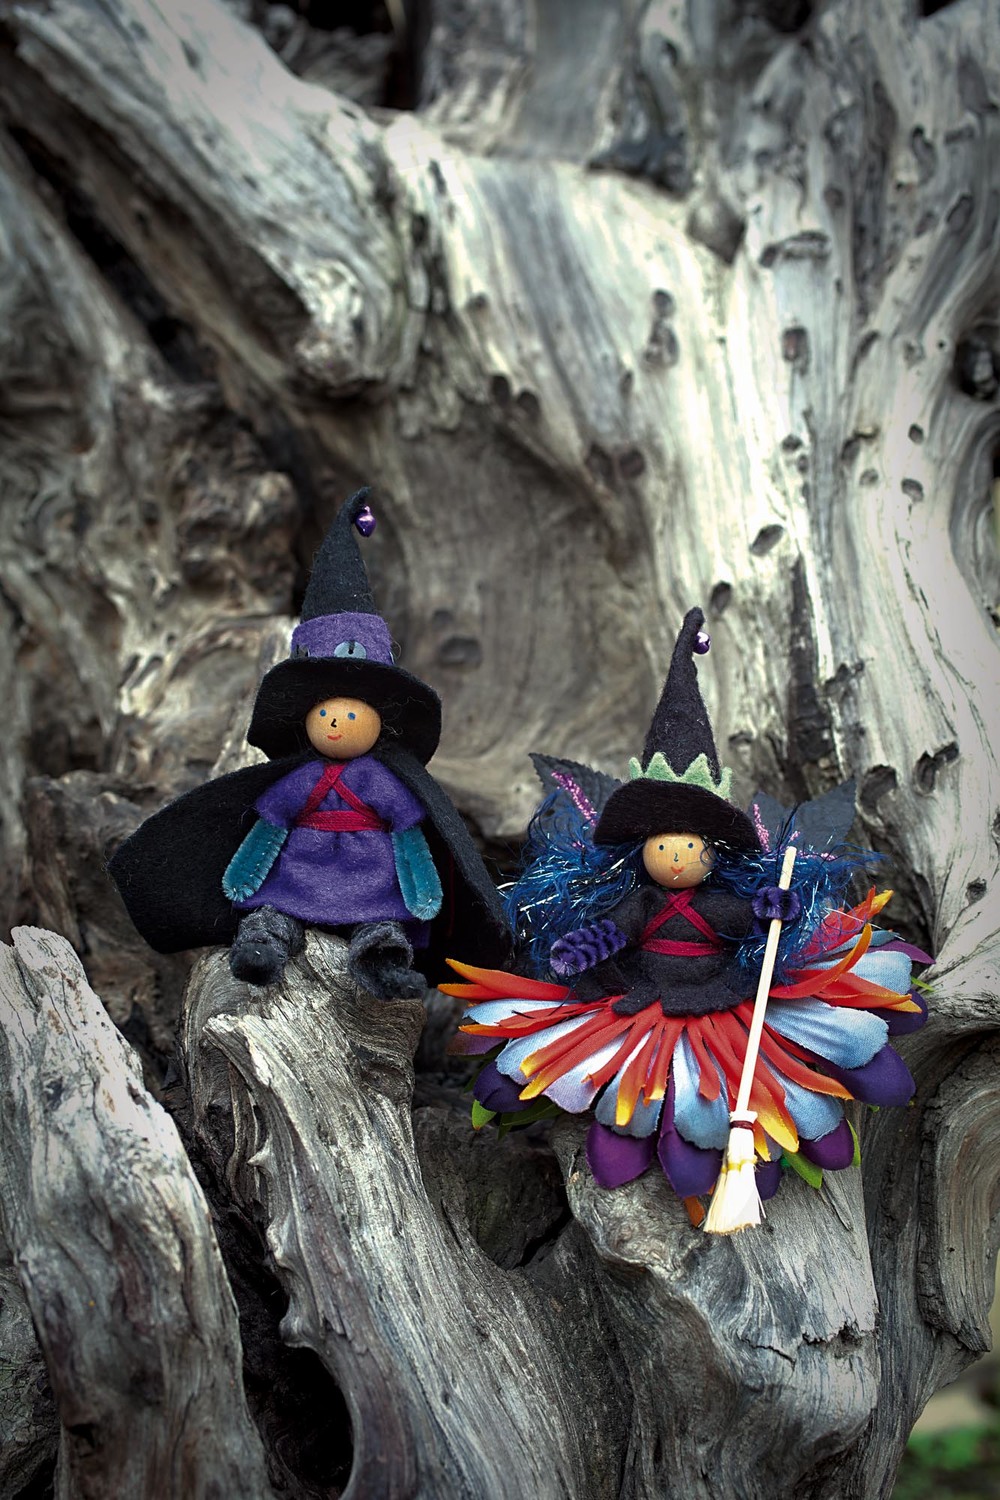 Autumn crafts in the Forest Fairy Crafts books by Lenka Vodicka-Paredes and Asia Curry. Handwork and enchanted ideas for children of all ages.